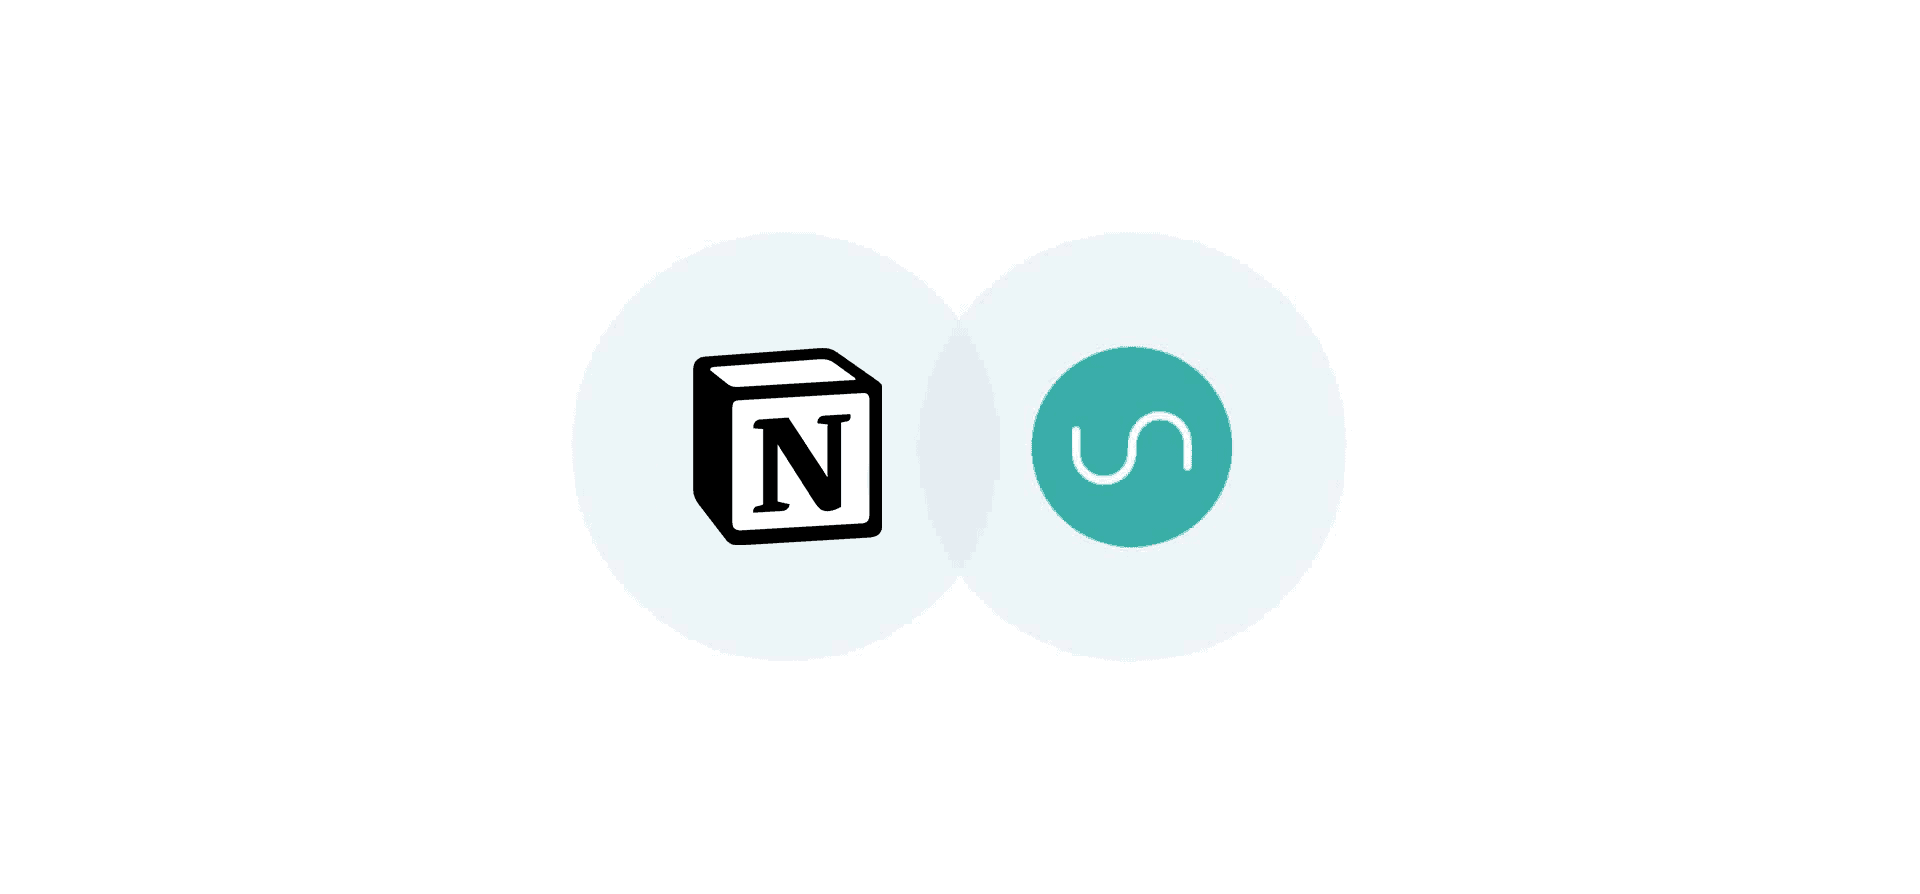 Logos for Notion and Unito, representing Unito's new Notion integration